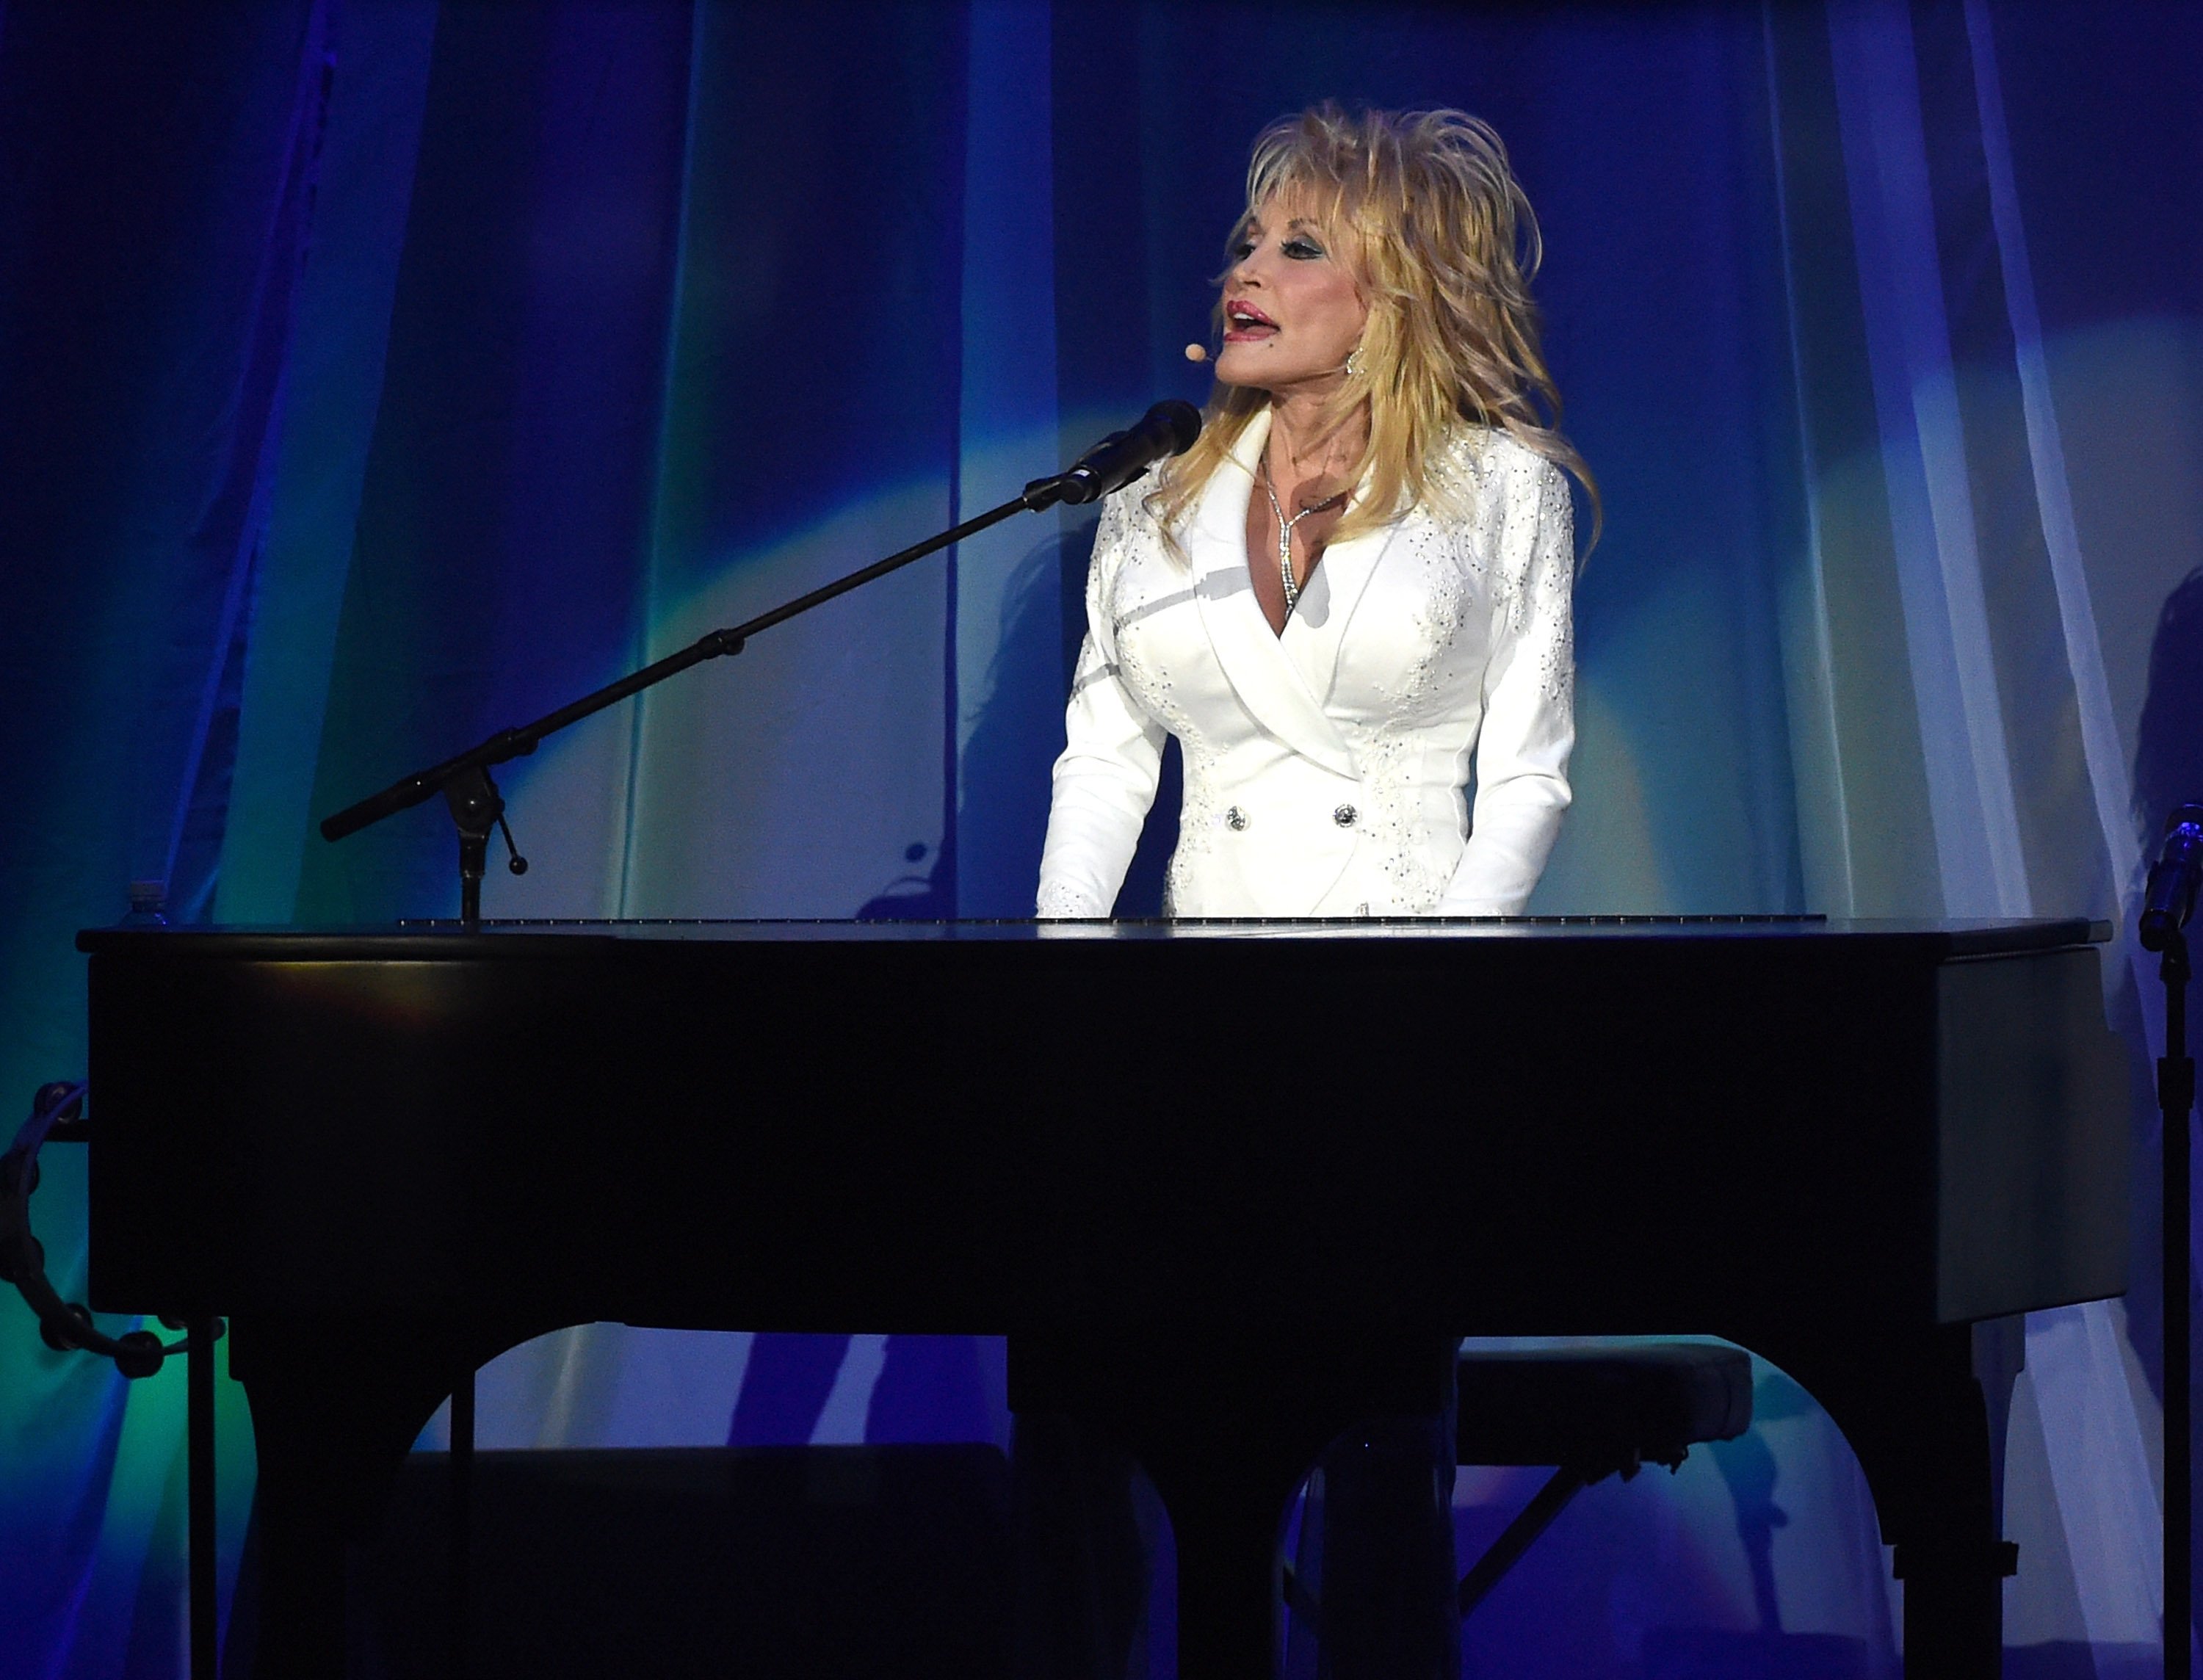 Dolly Parton performing on stage. She is sitting and singing at a piano in an all-white outfit.